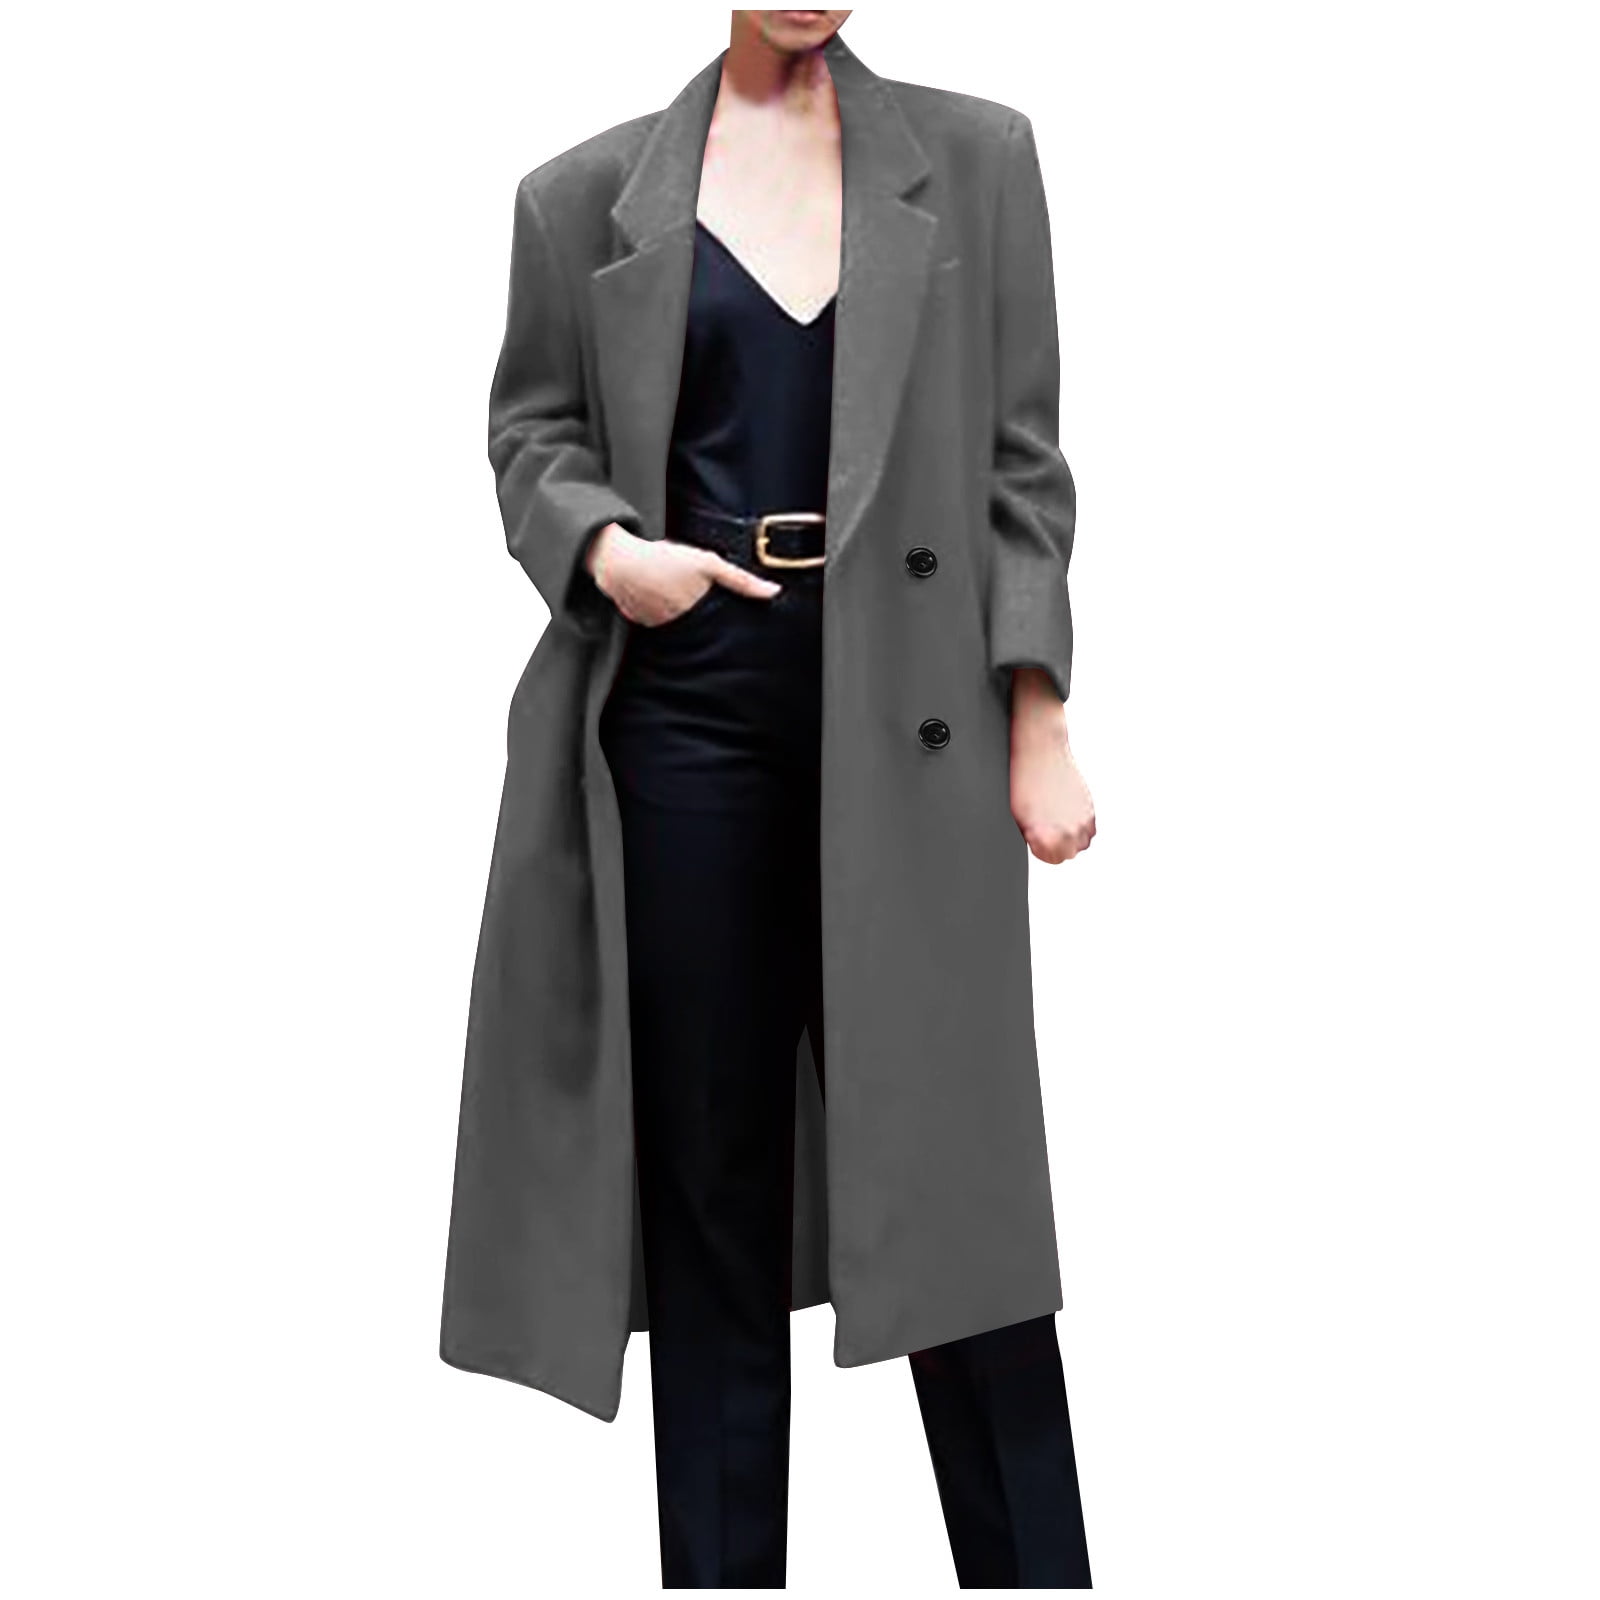 Trench Coats for Women, Women's Solid Color Tweed Lapel Pocket Button ...